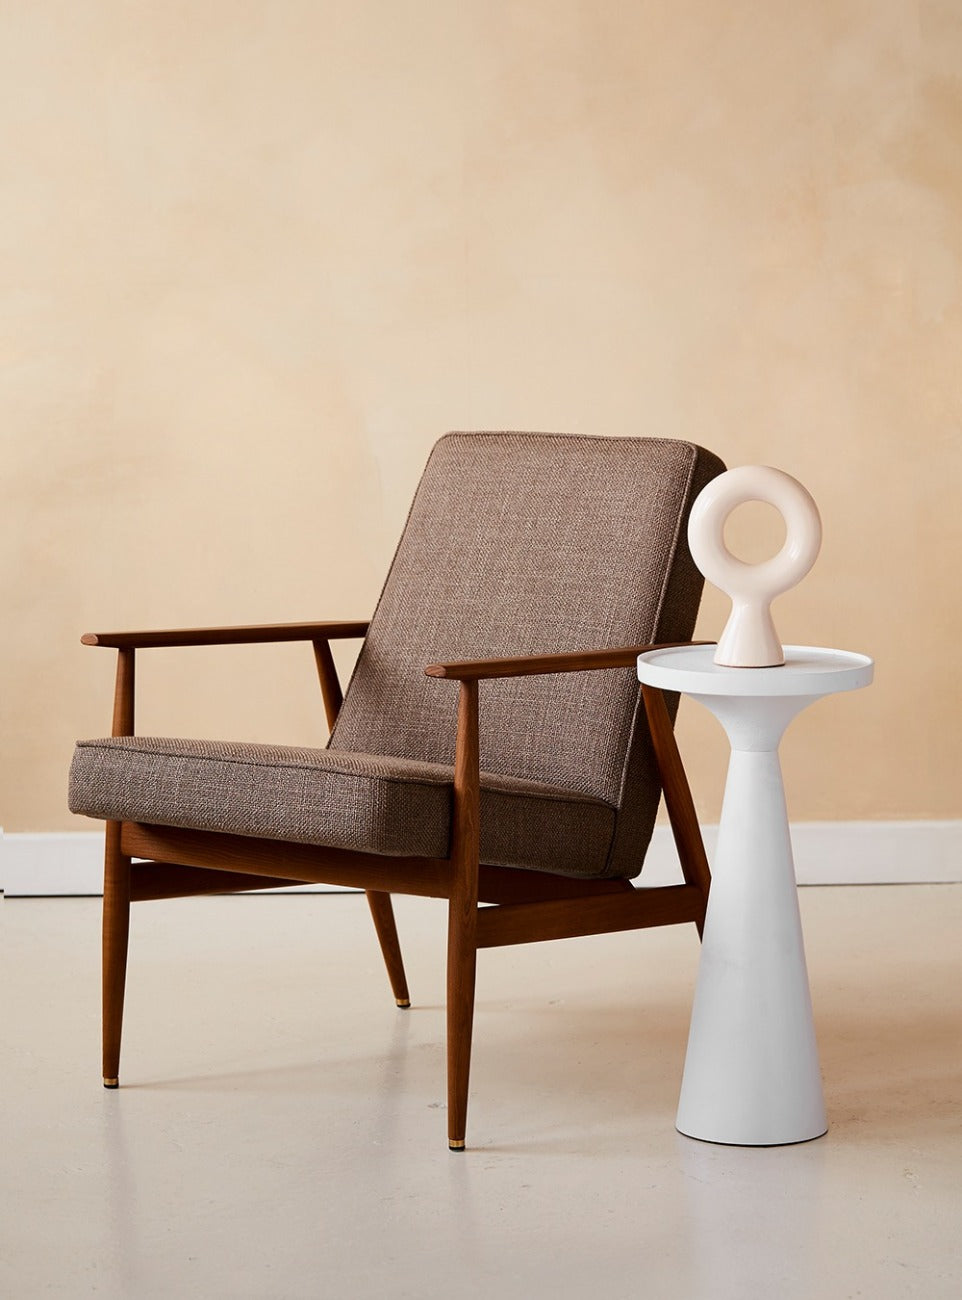 Ella Slim White Side Table with chair